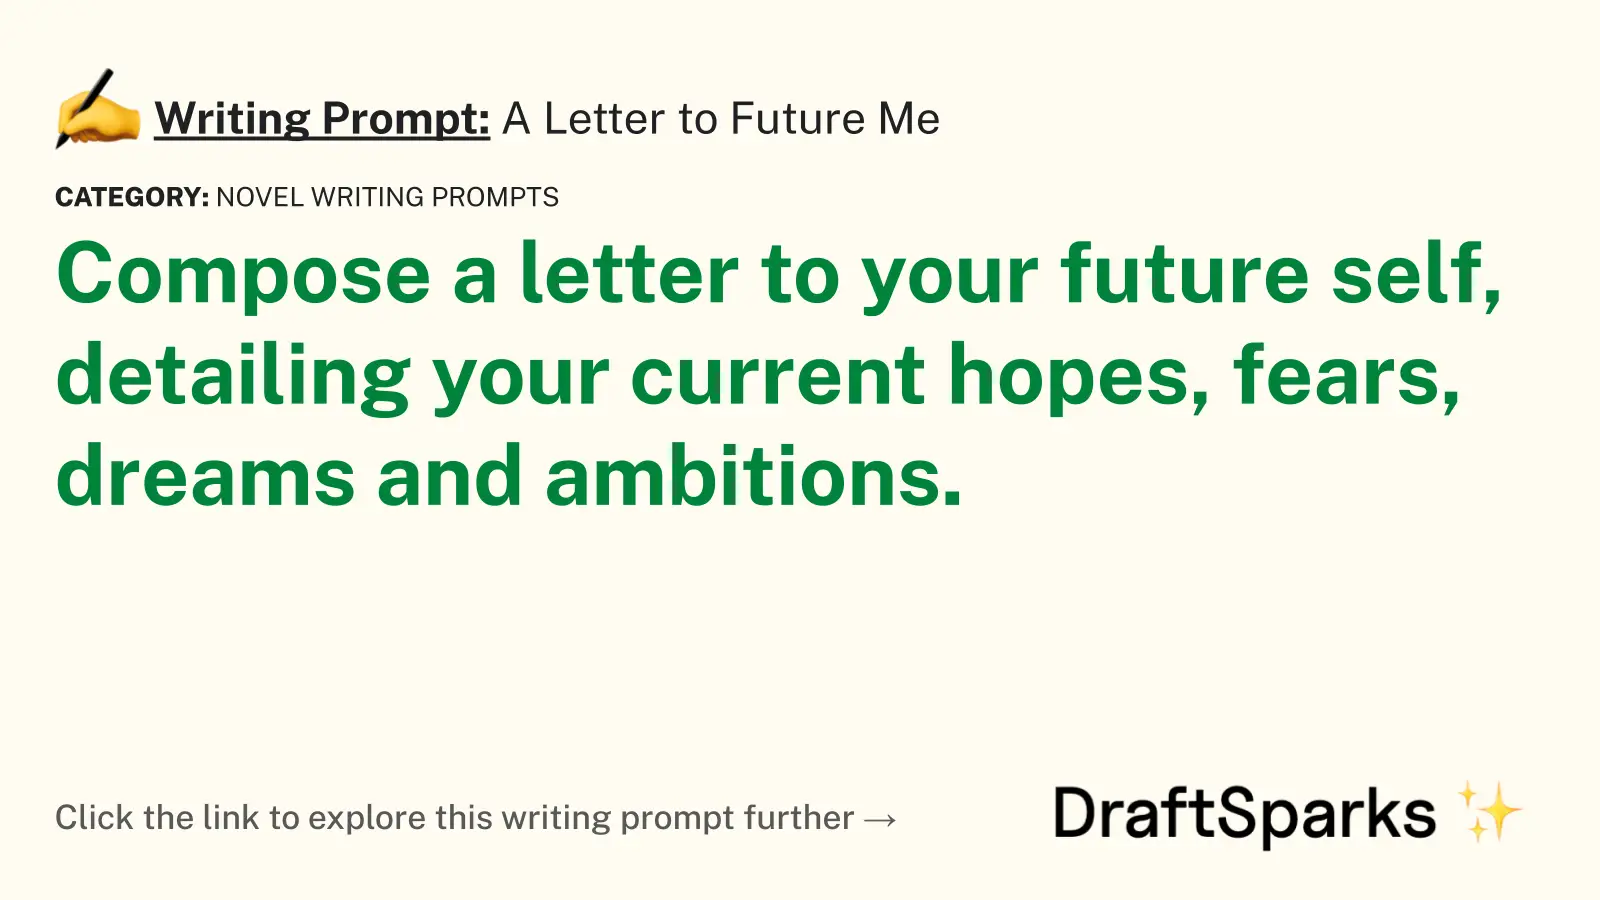 A Letter to Future Me